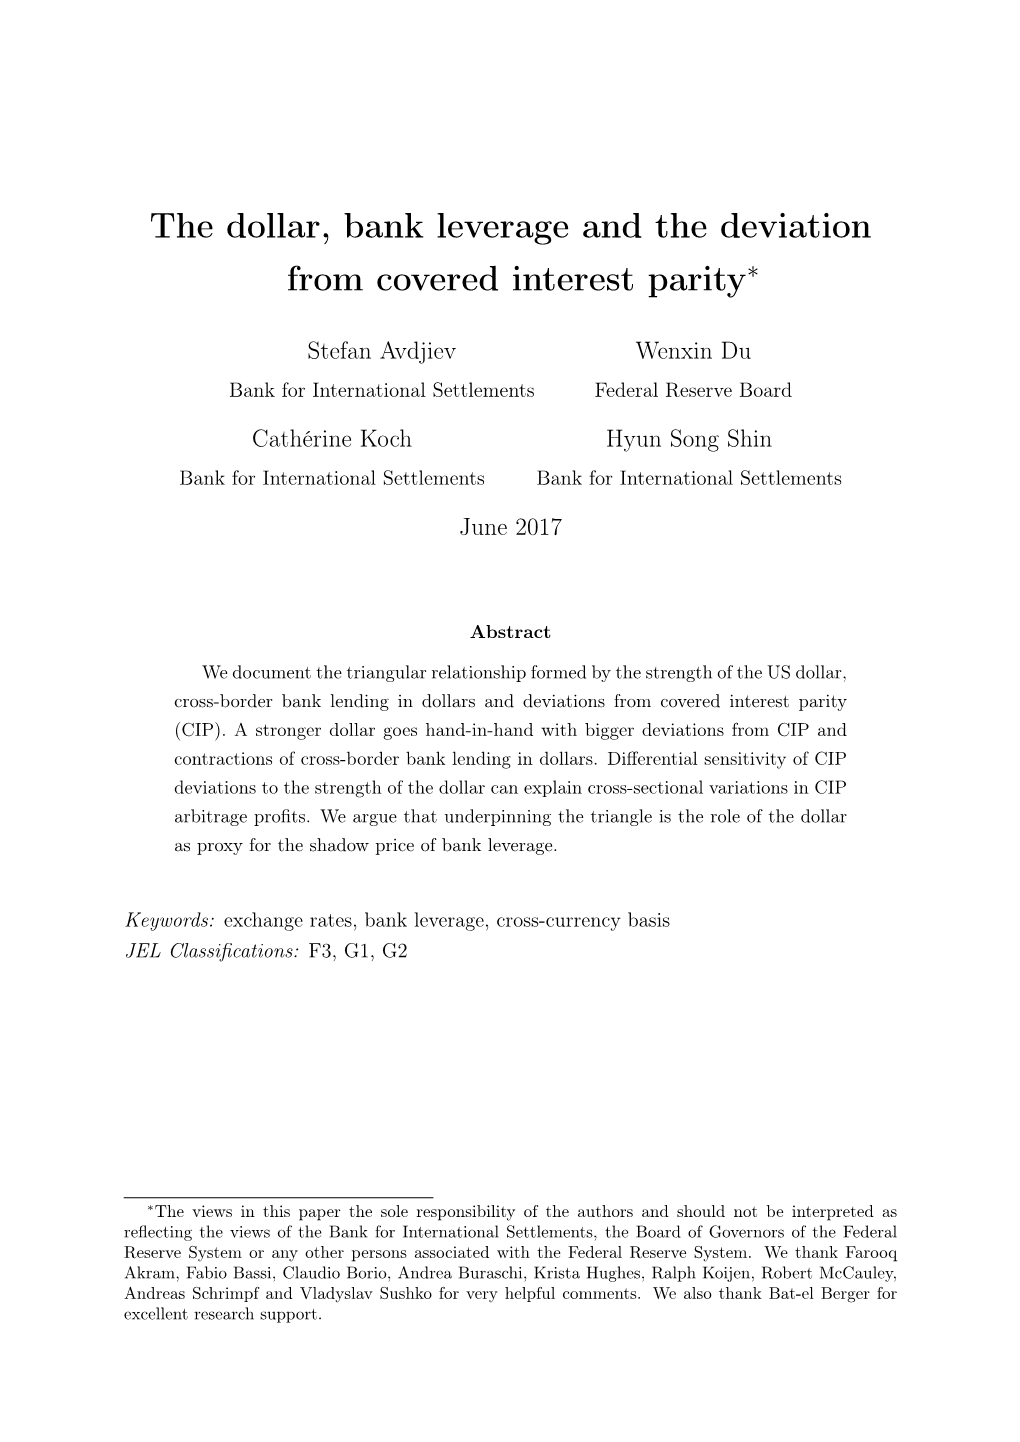 The Dollar, Bank Leverage and the Deviation from Covered Interest Parity∗